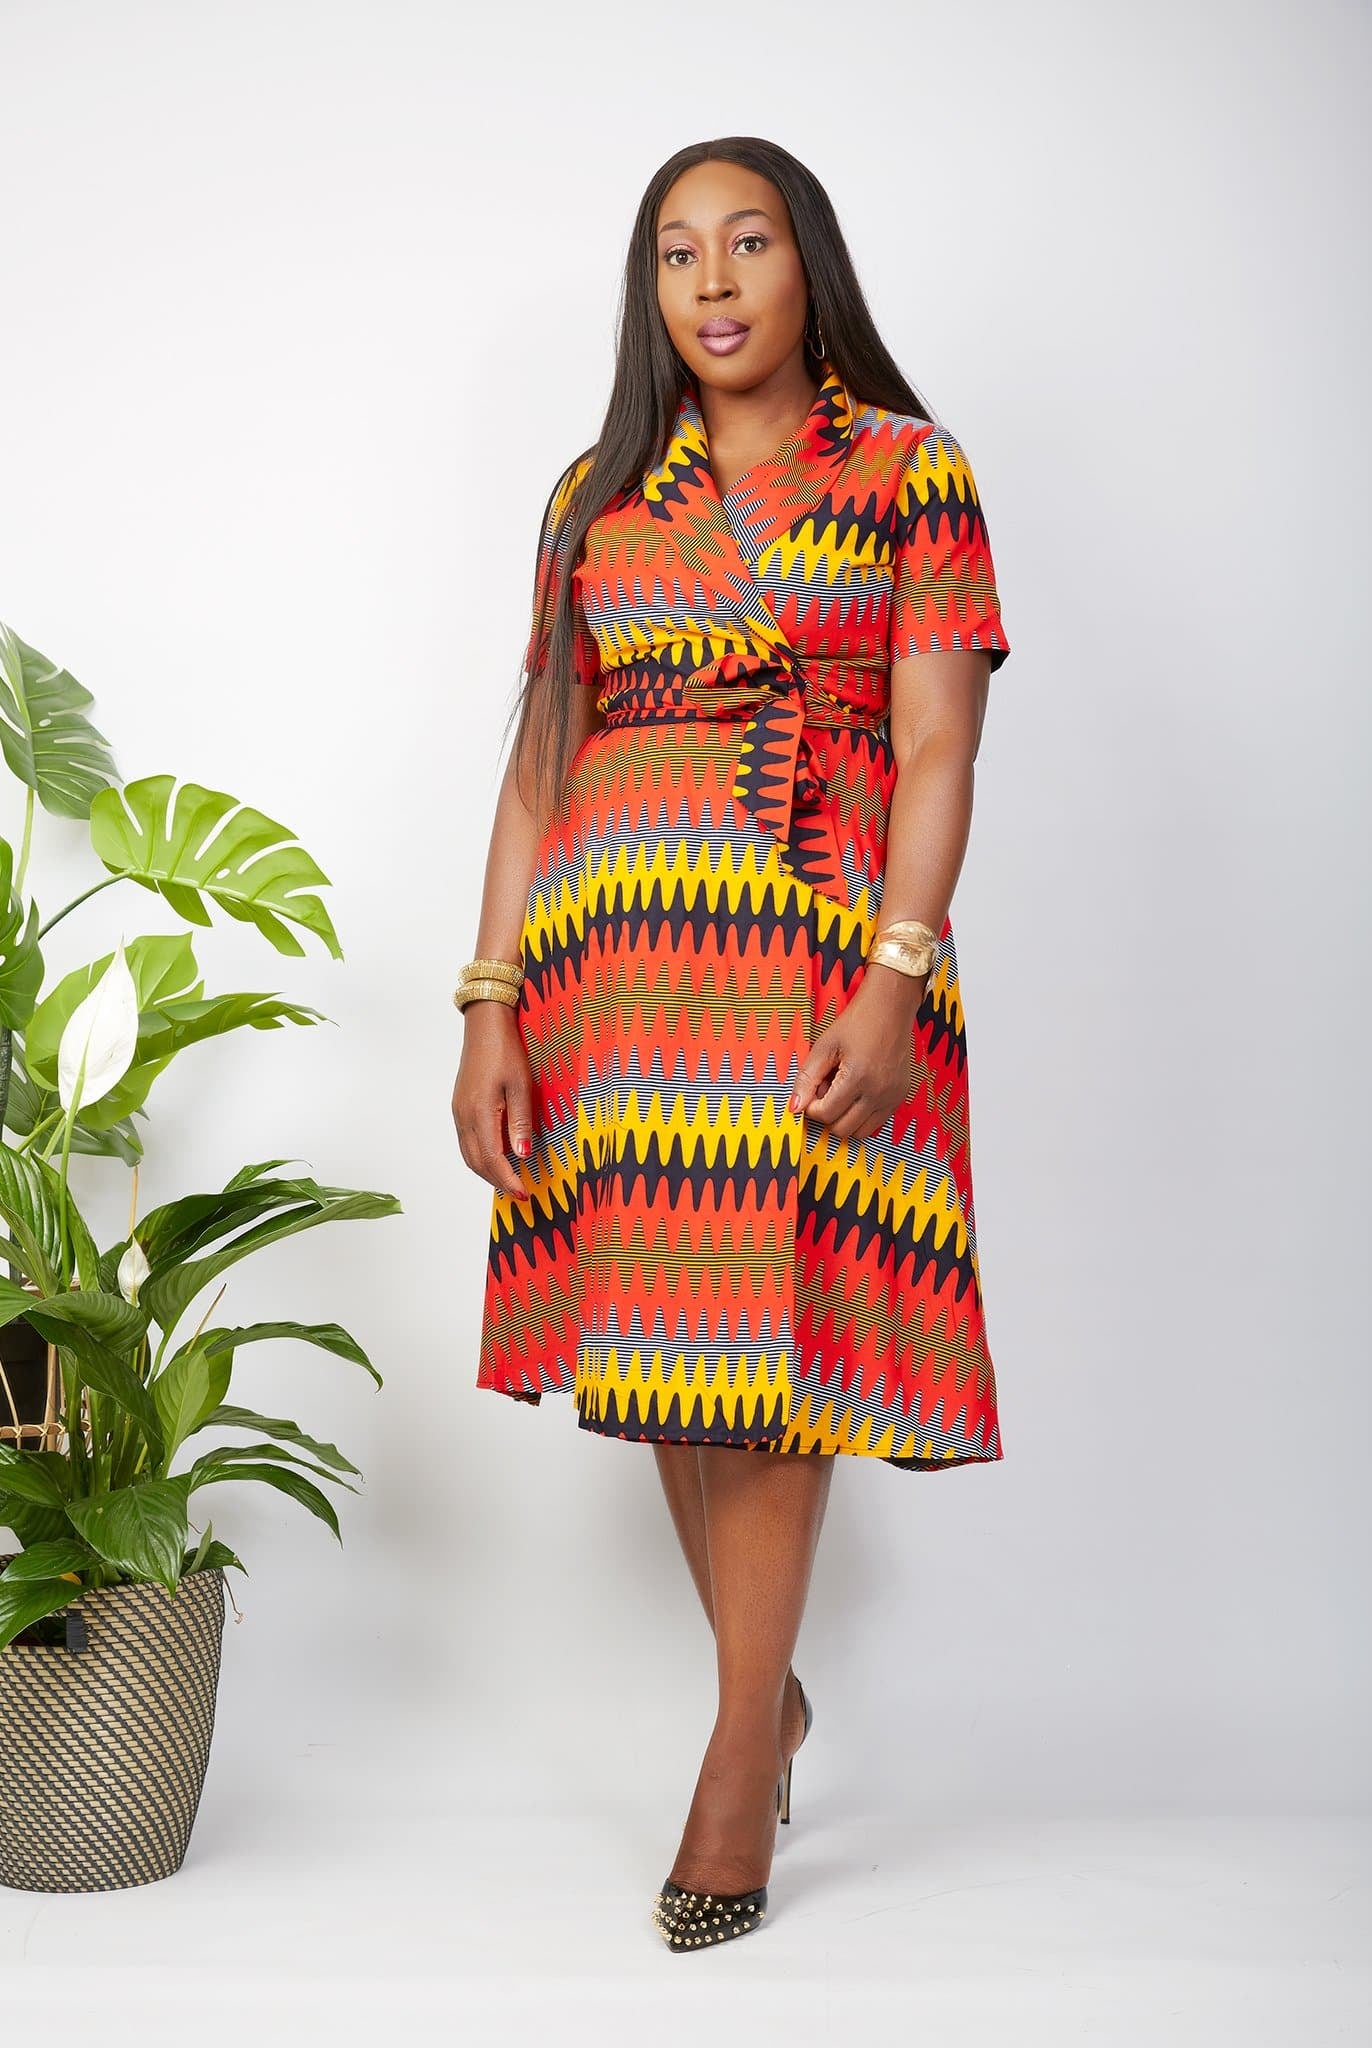 African dress styles | African clothing | african outfit | kitenge dresses | Africa Dresses for Women | Ankara Styles for ladies | African dresses for work | Danshiki Dress|Ghana African dress | Kente Dress | African dress | African print Dress | African Clothing Online  Shop | Short African dress | Mini African dress UK | African  dress UK 